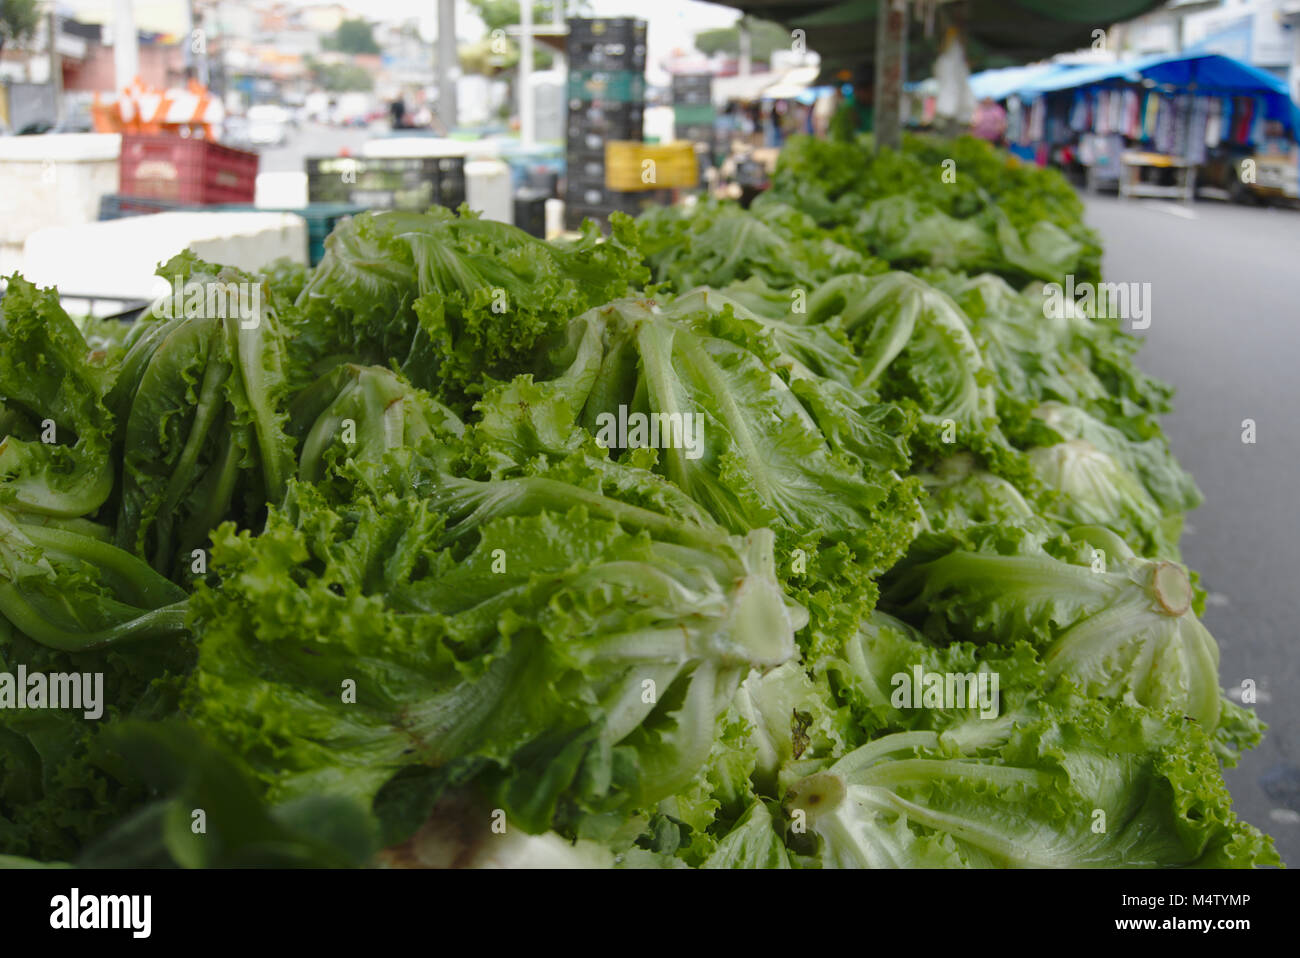 Lettuce at a farmers market stall. Stock Photo